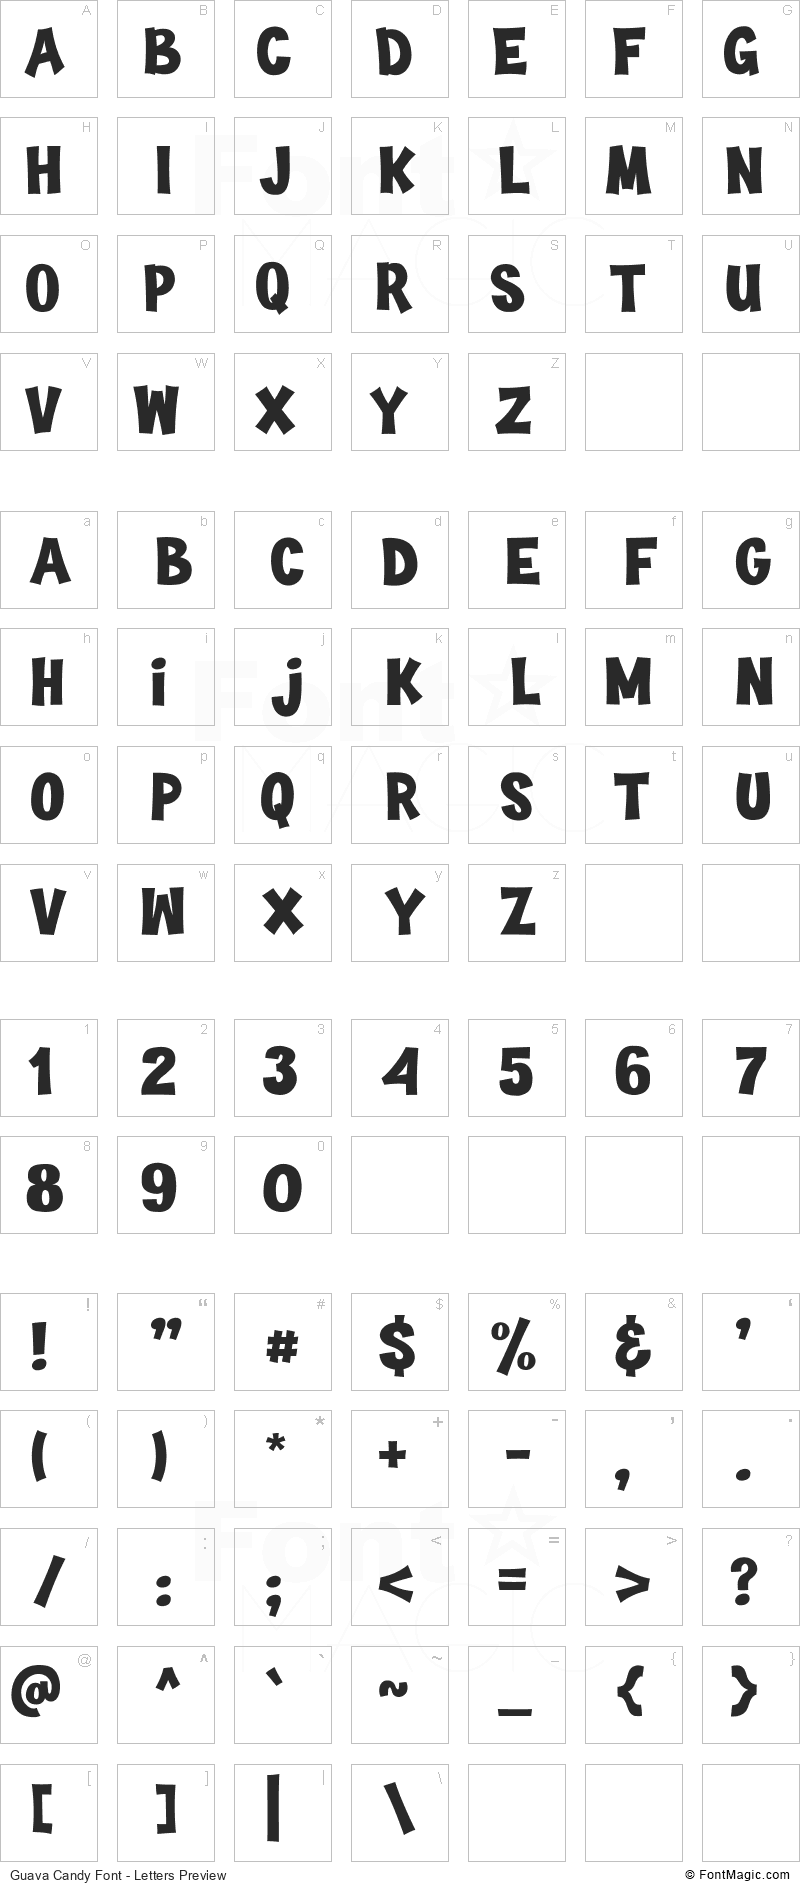 Guava Candy Font - All Latters Preview Chart